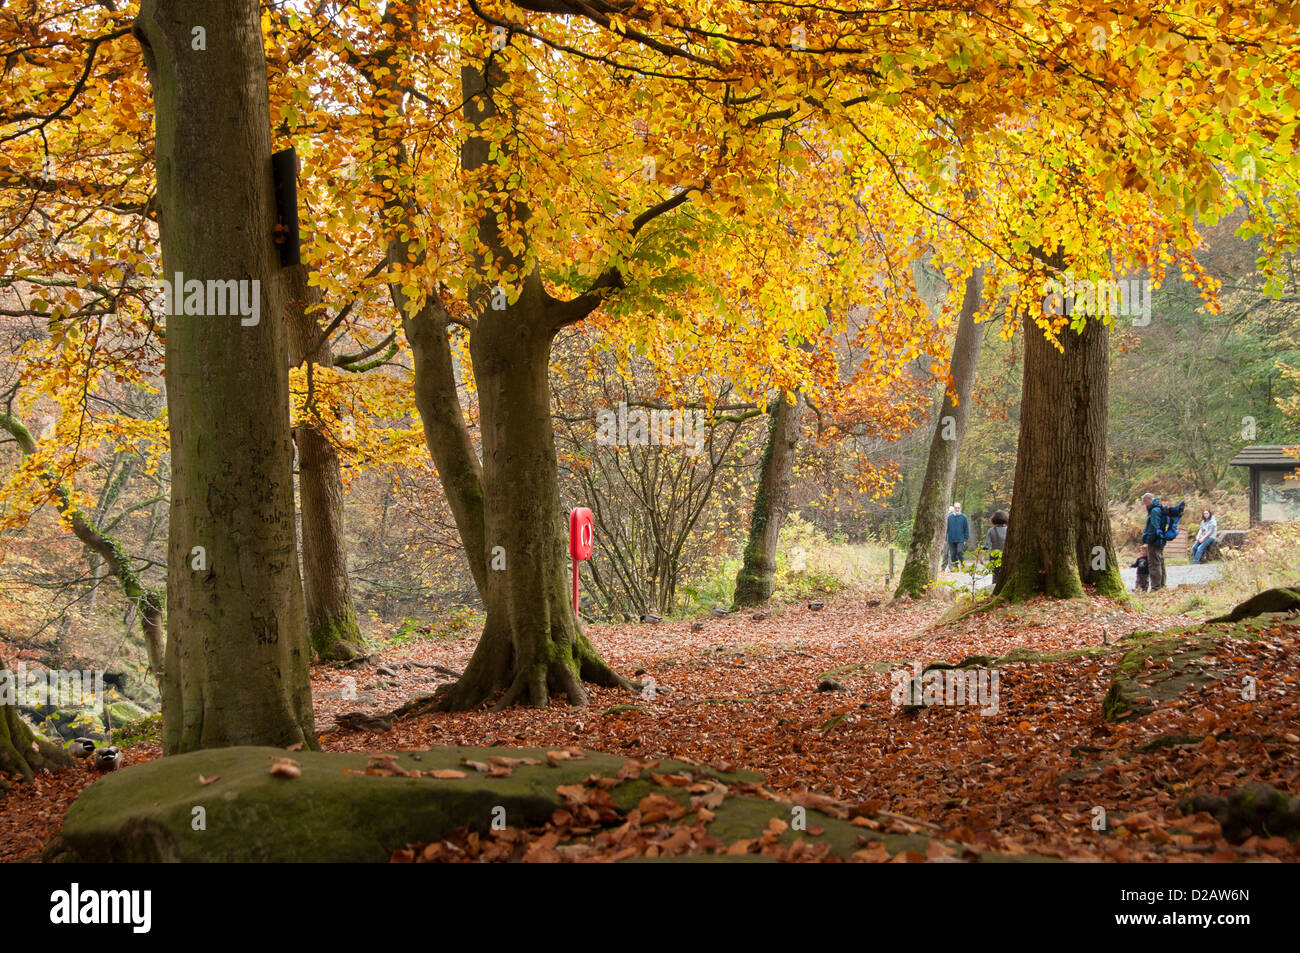 People enjoying rich autumn colours on trees & a relaxing family walk on day out in Strid Woods - Bolton Abbey Estate, Yorkshire Dales, England, UK. Stock Photo